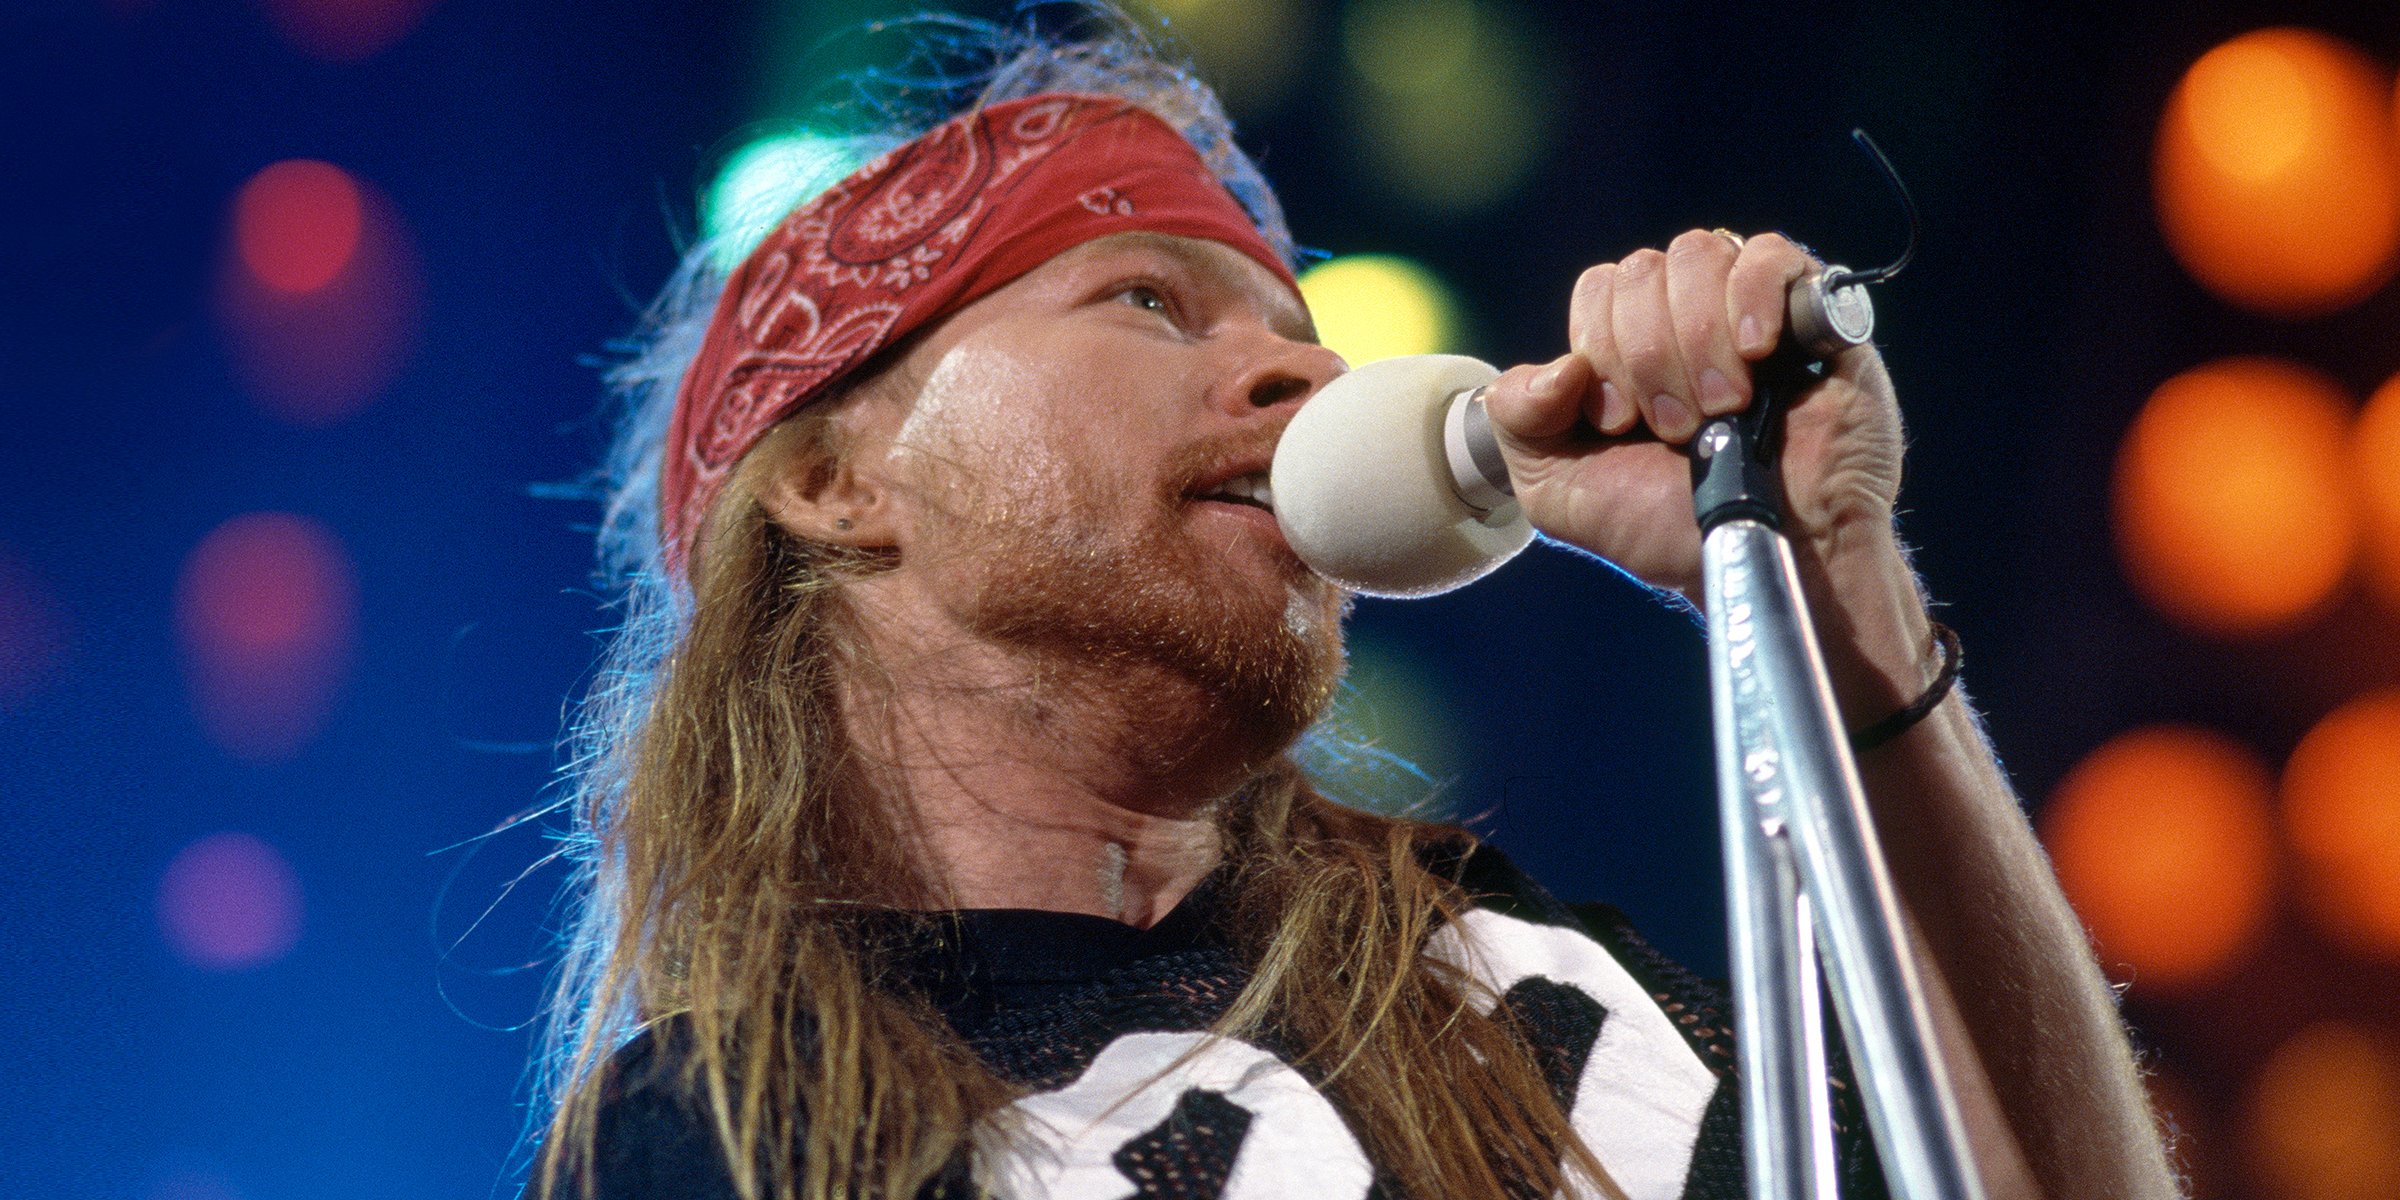 Axl Rose | Source: Getty Images